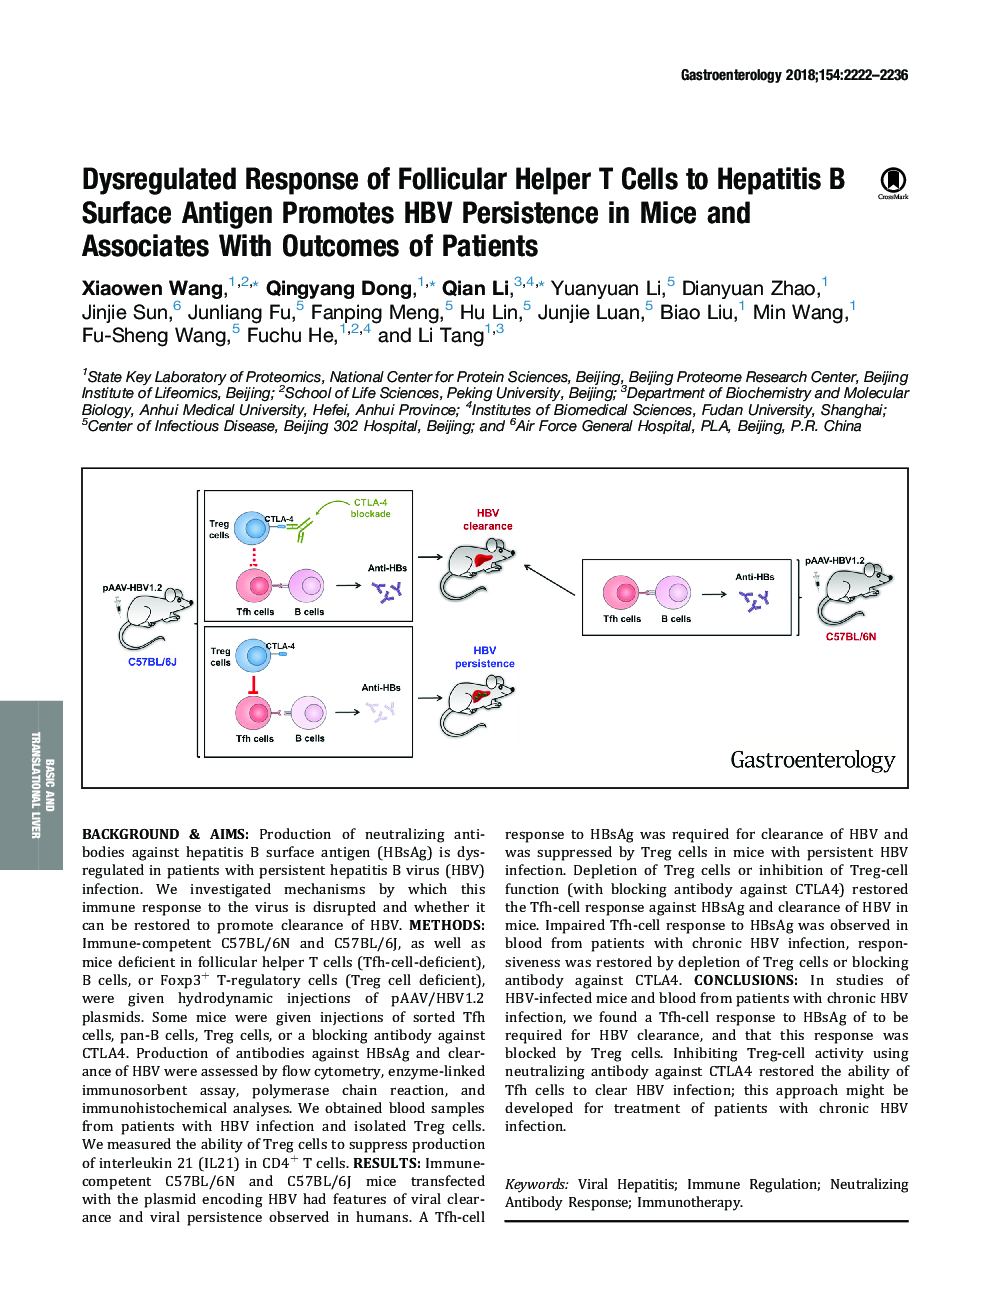 Dysregulated Response of Follicular Helper T Cells to Hepatitis B Surface Antigen Promotes HBV Persistence in Mice and Associates With Outcomes of Patients